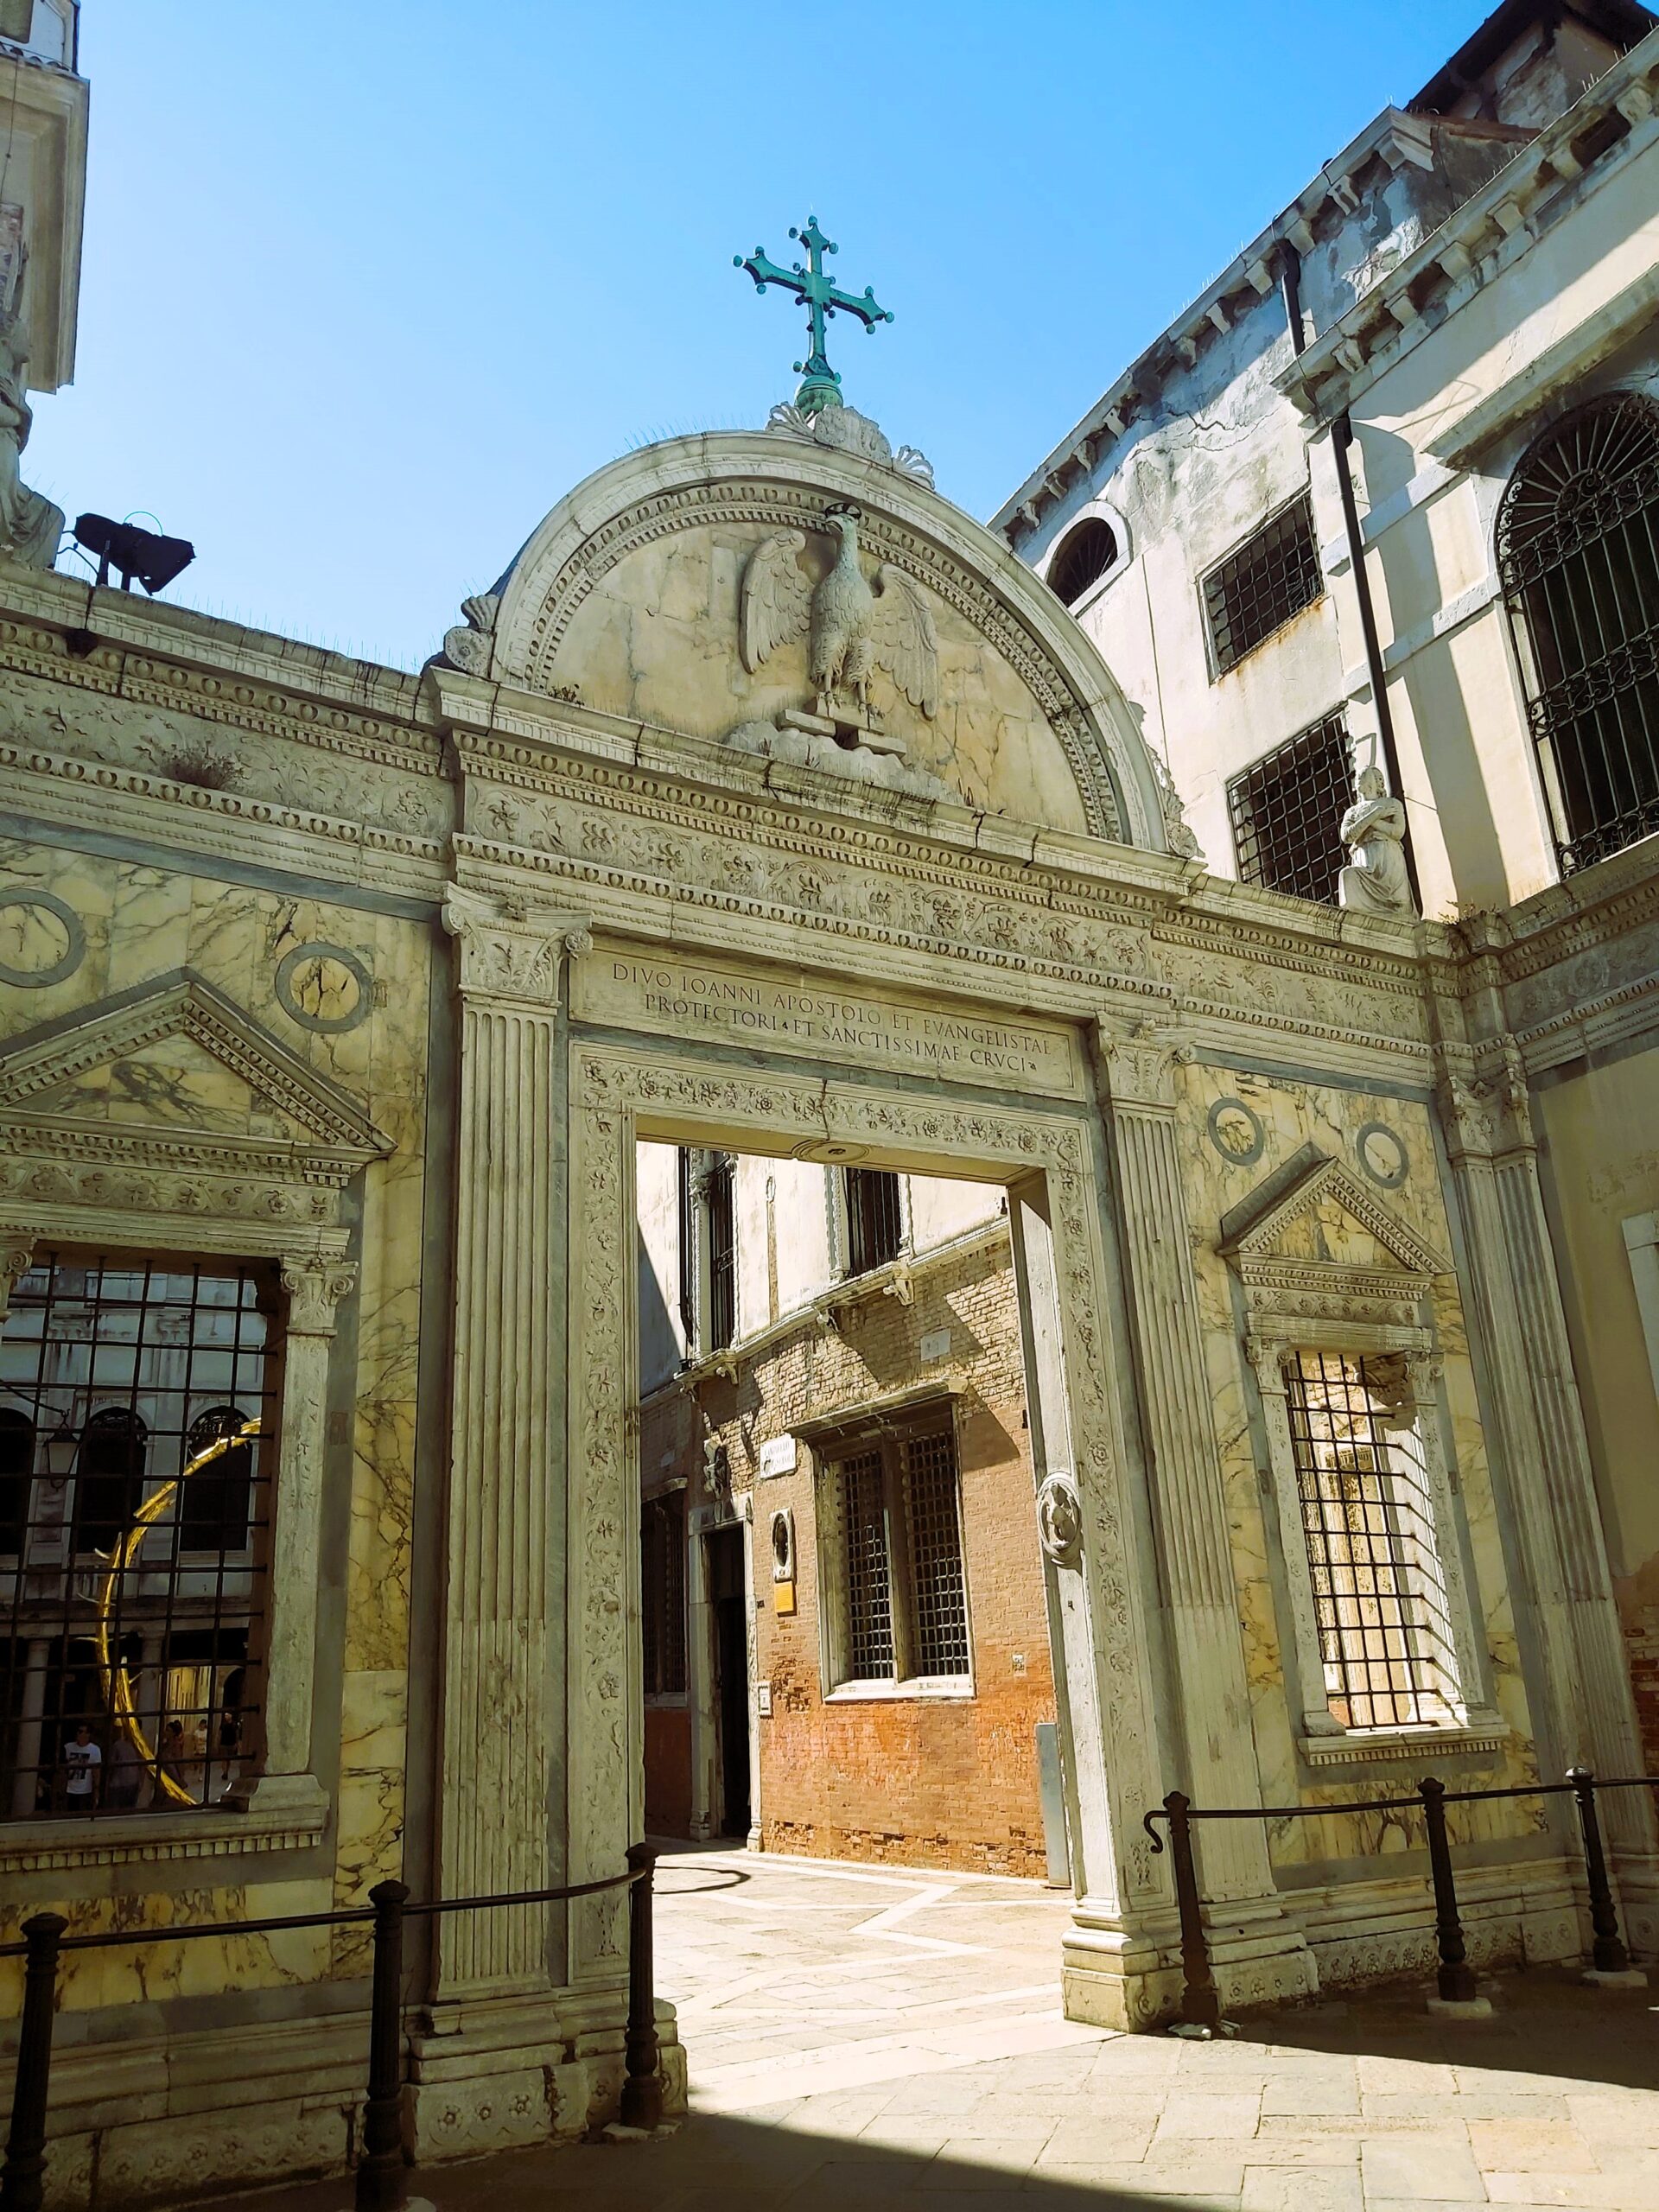 An ornate doorway with an eagle and cross above it in Venice, Italy